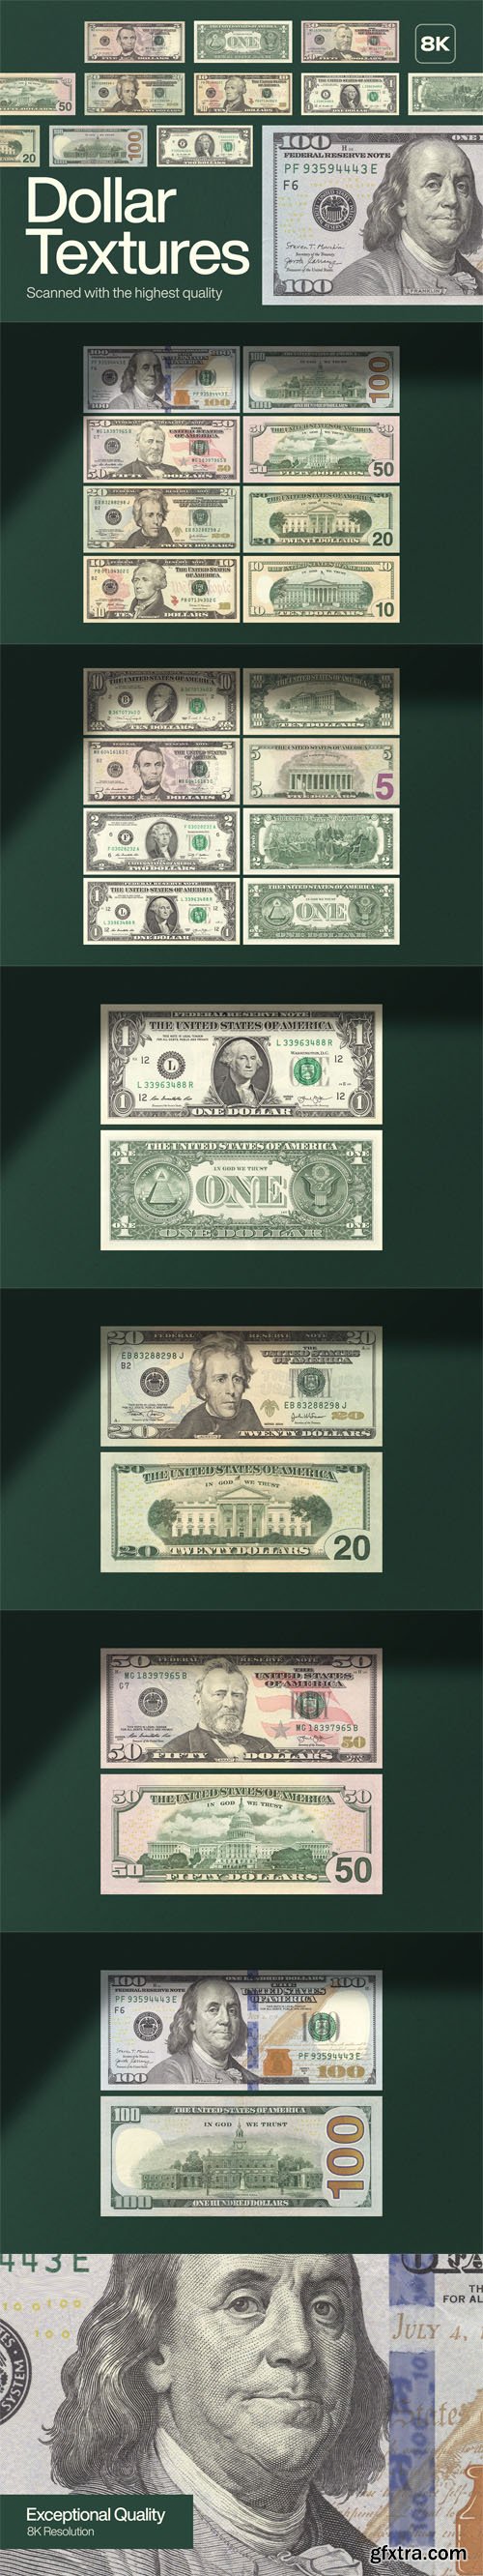 Dollar Banknote Textures Collection